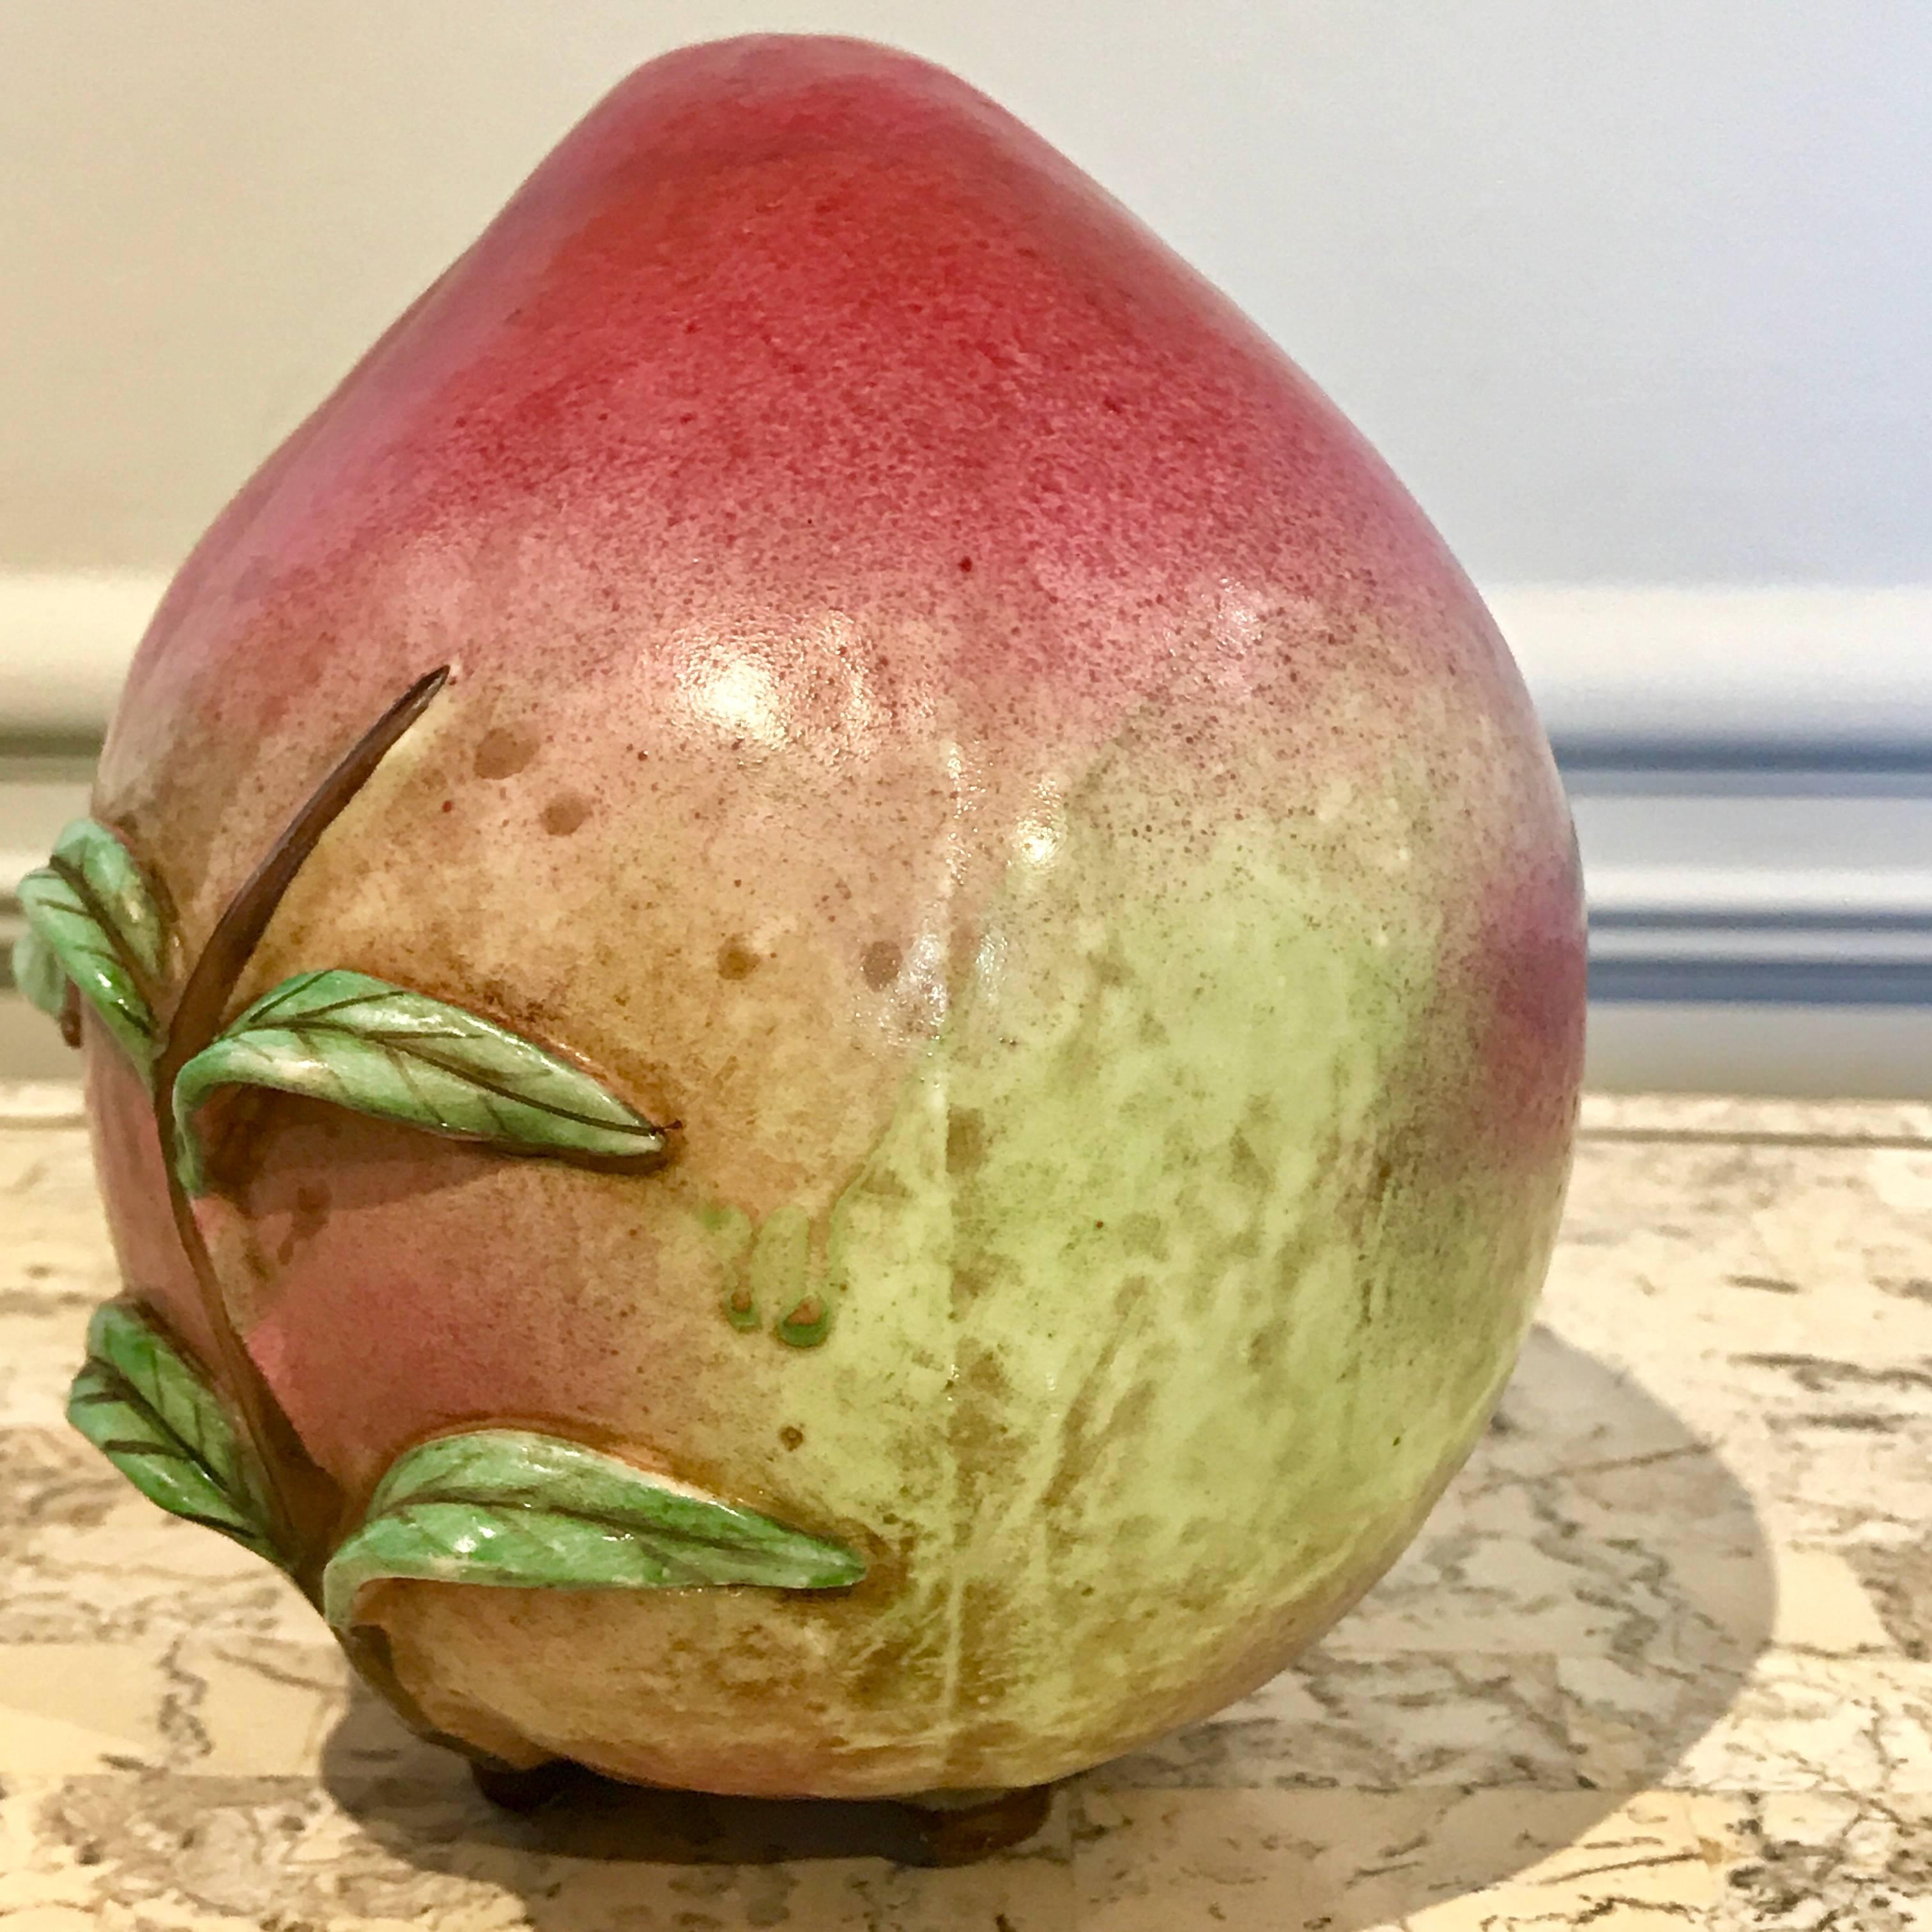 Rare Chinese export altar fruit of a standing peach, this example is footed and stands upright instead of typically laying horizontally.